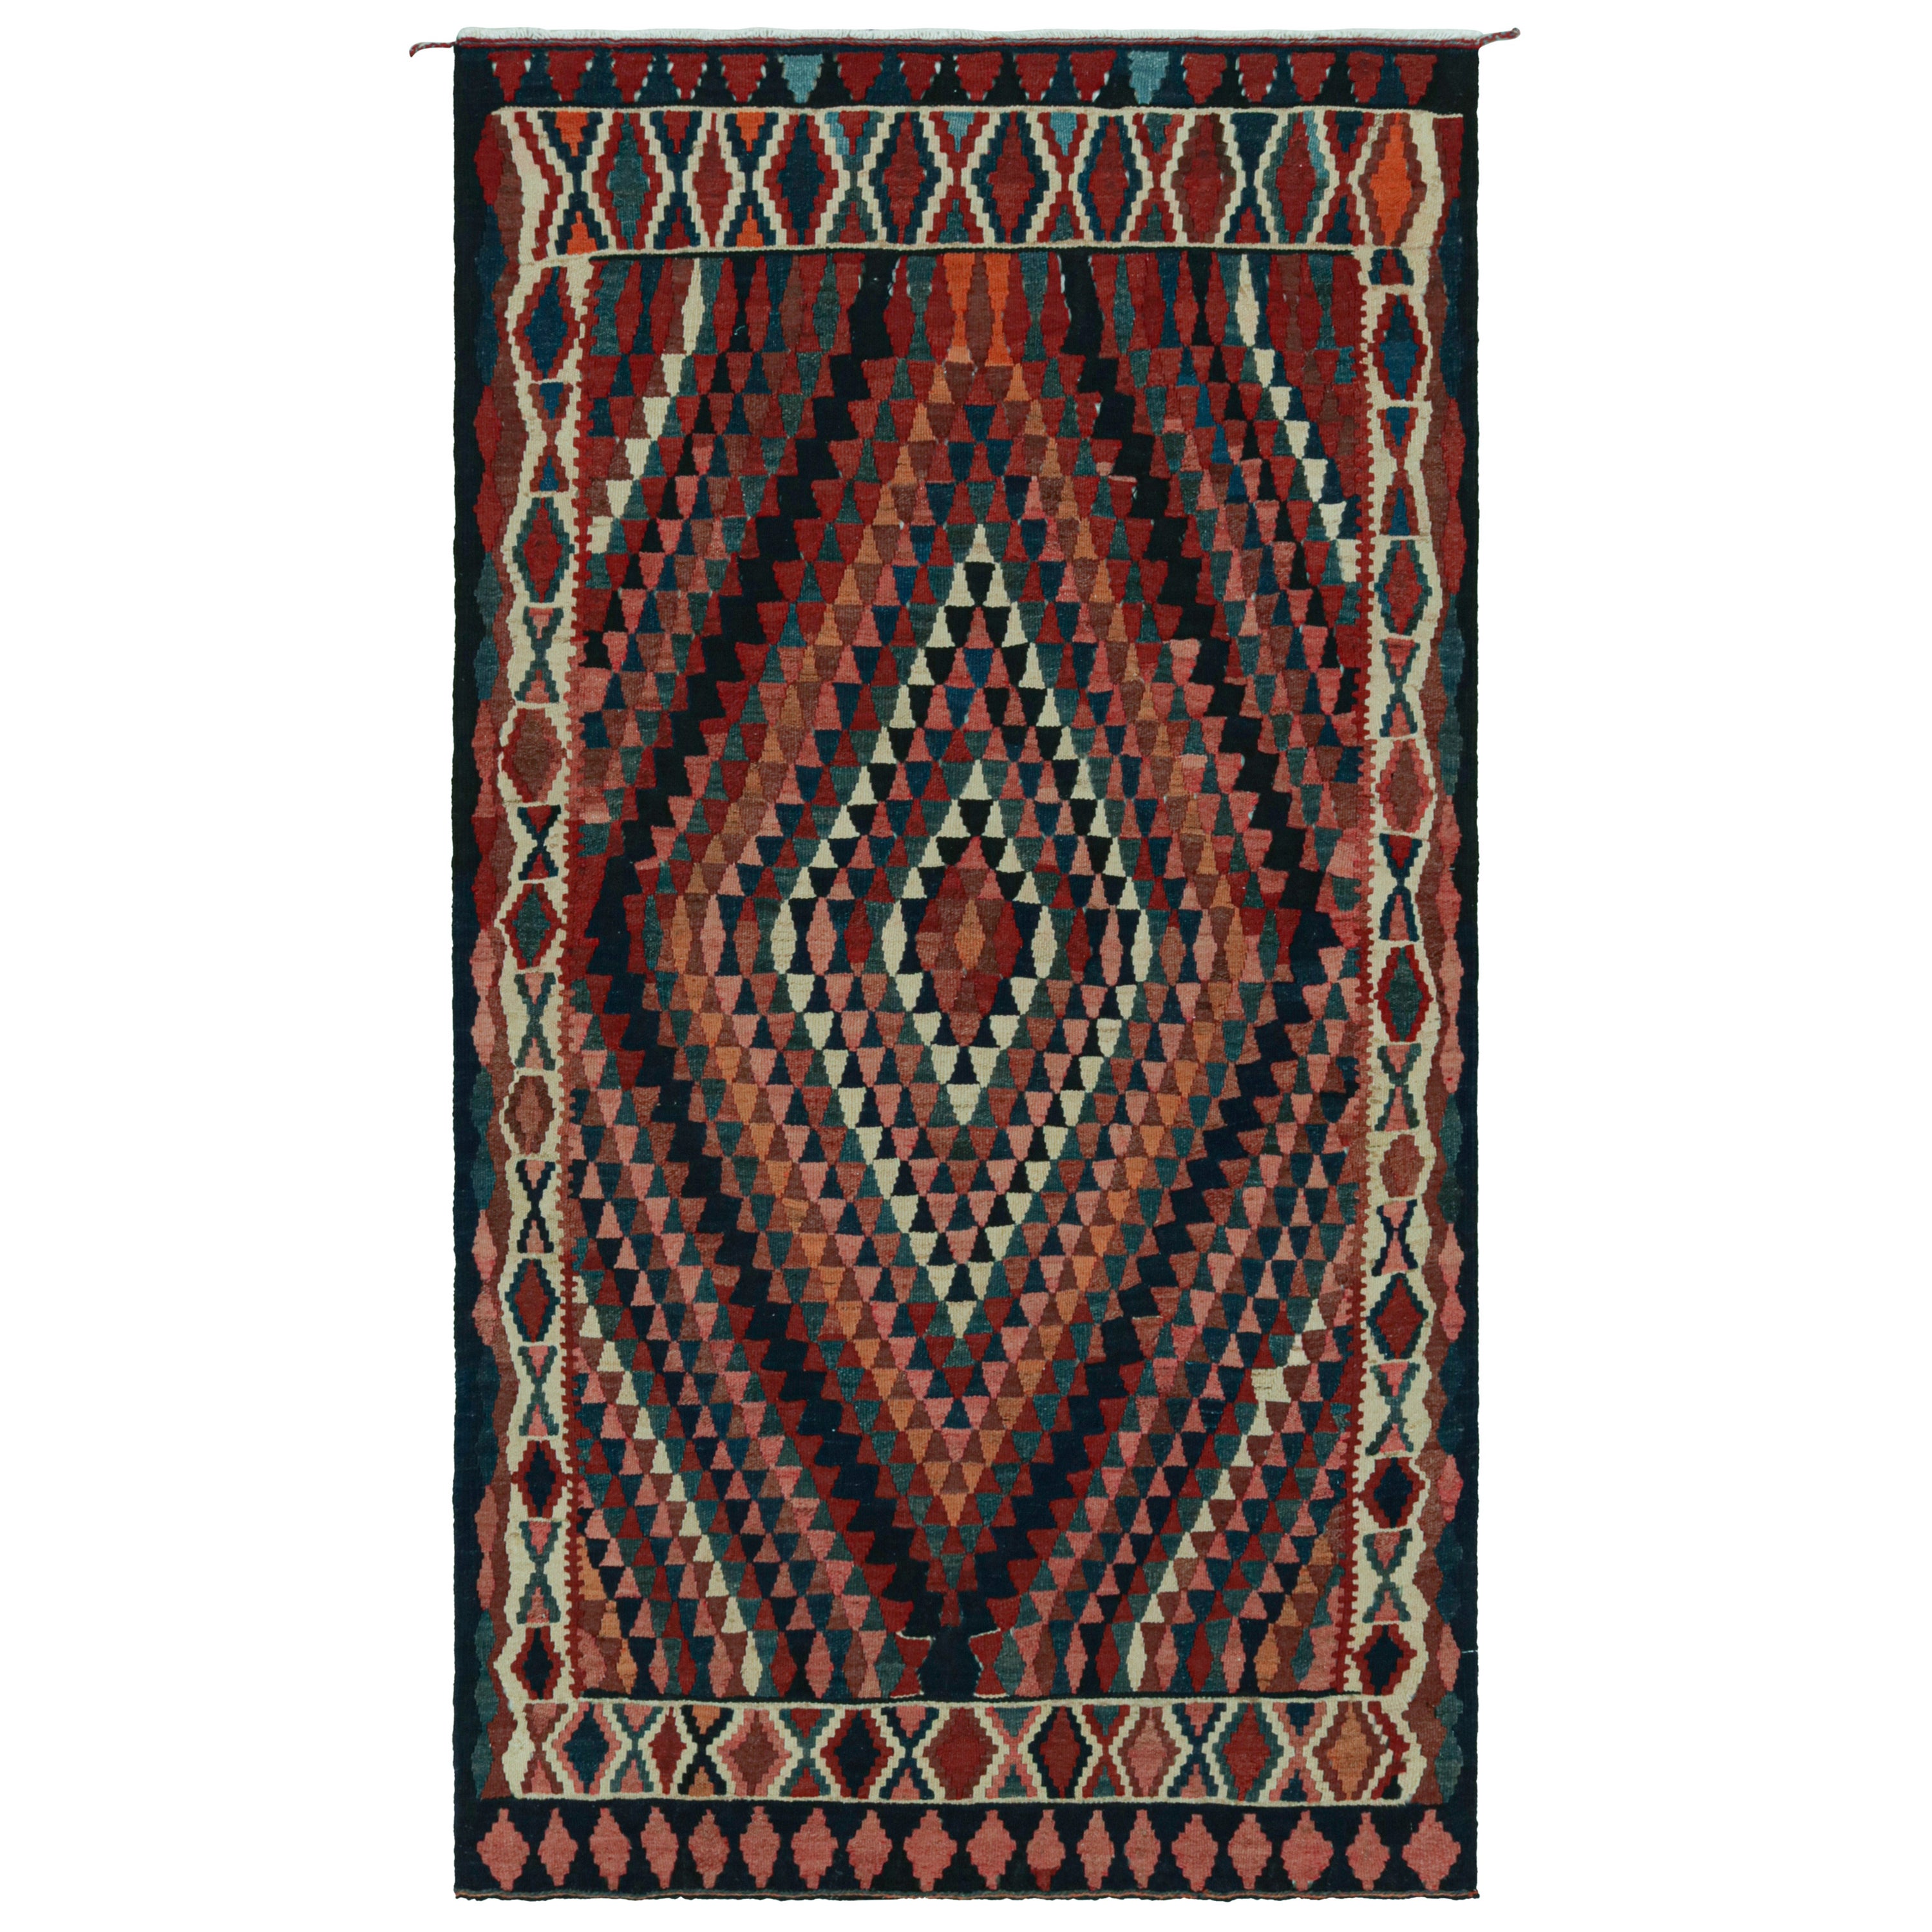 Vintage Afghan Tribal Kilim with Colorful Geometric Patterns, from Rug & Kilim For Sale